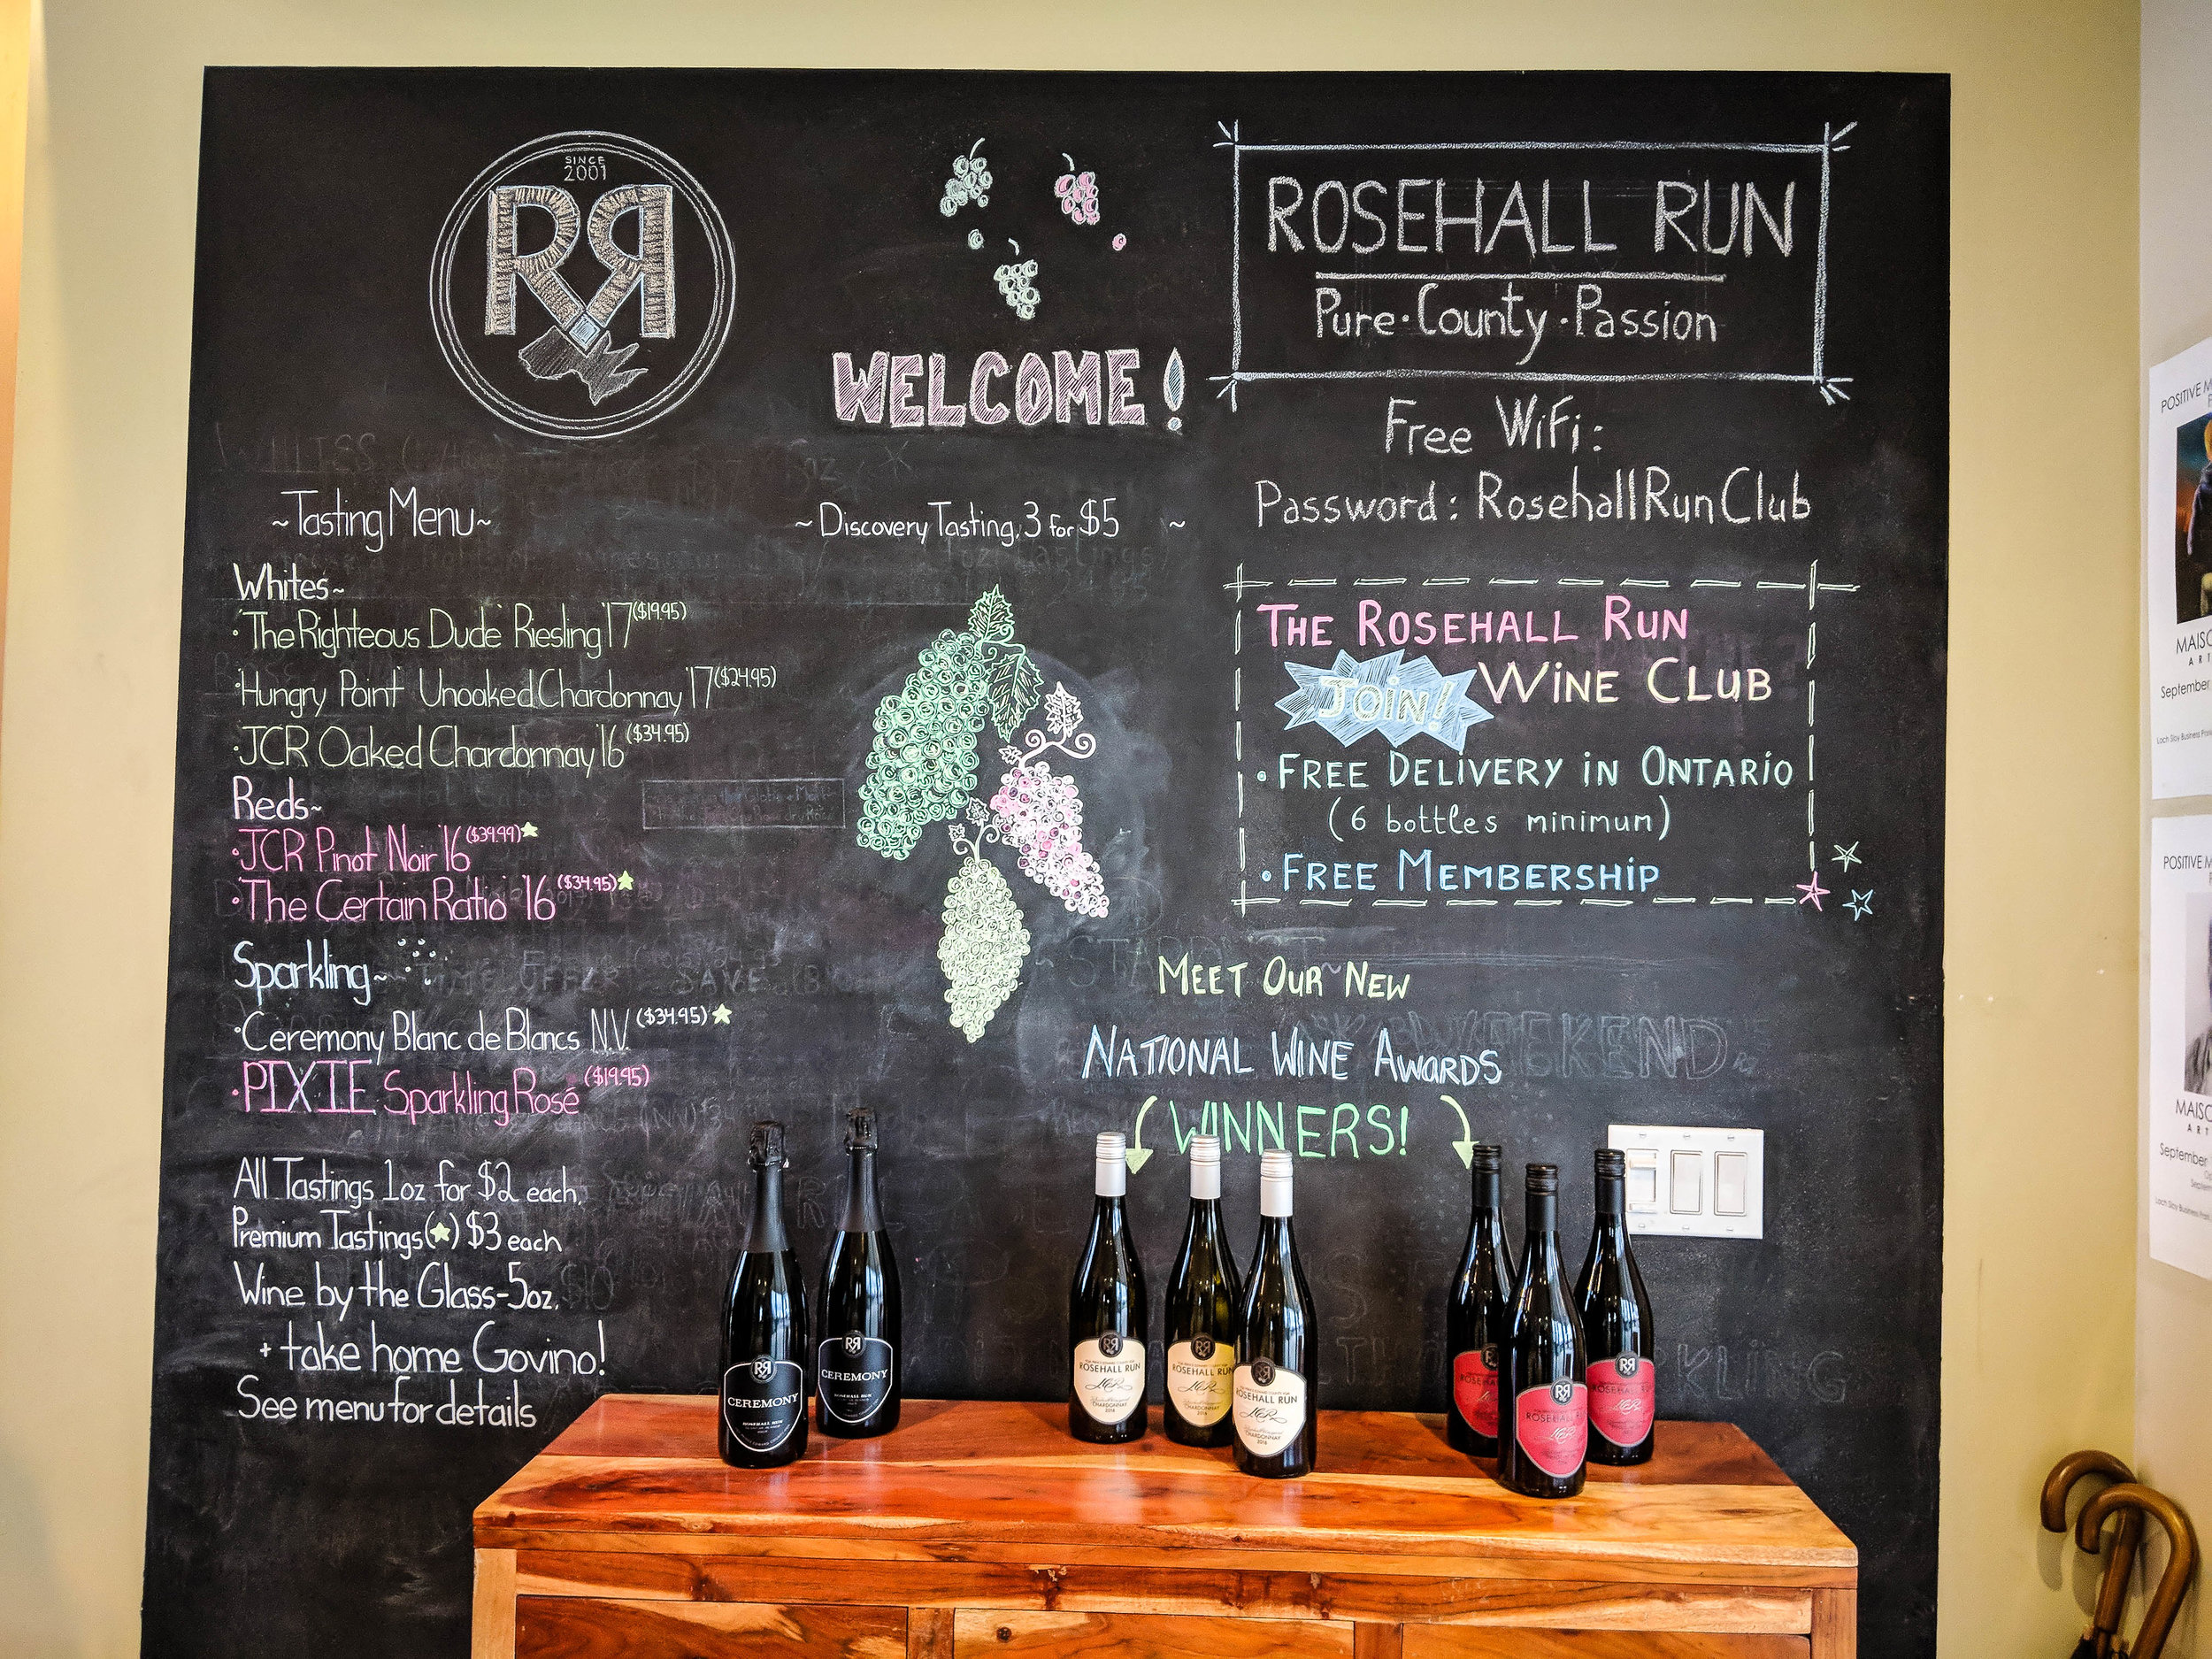 Rosehall Run - Things to do in Prince Edward County